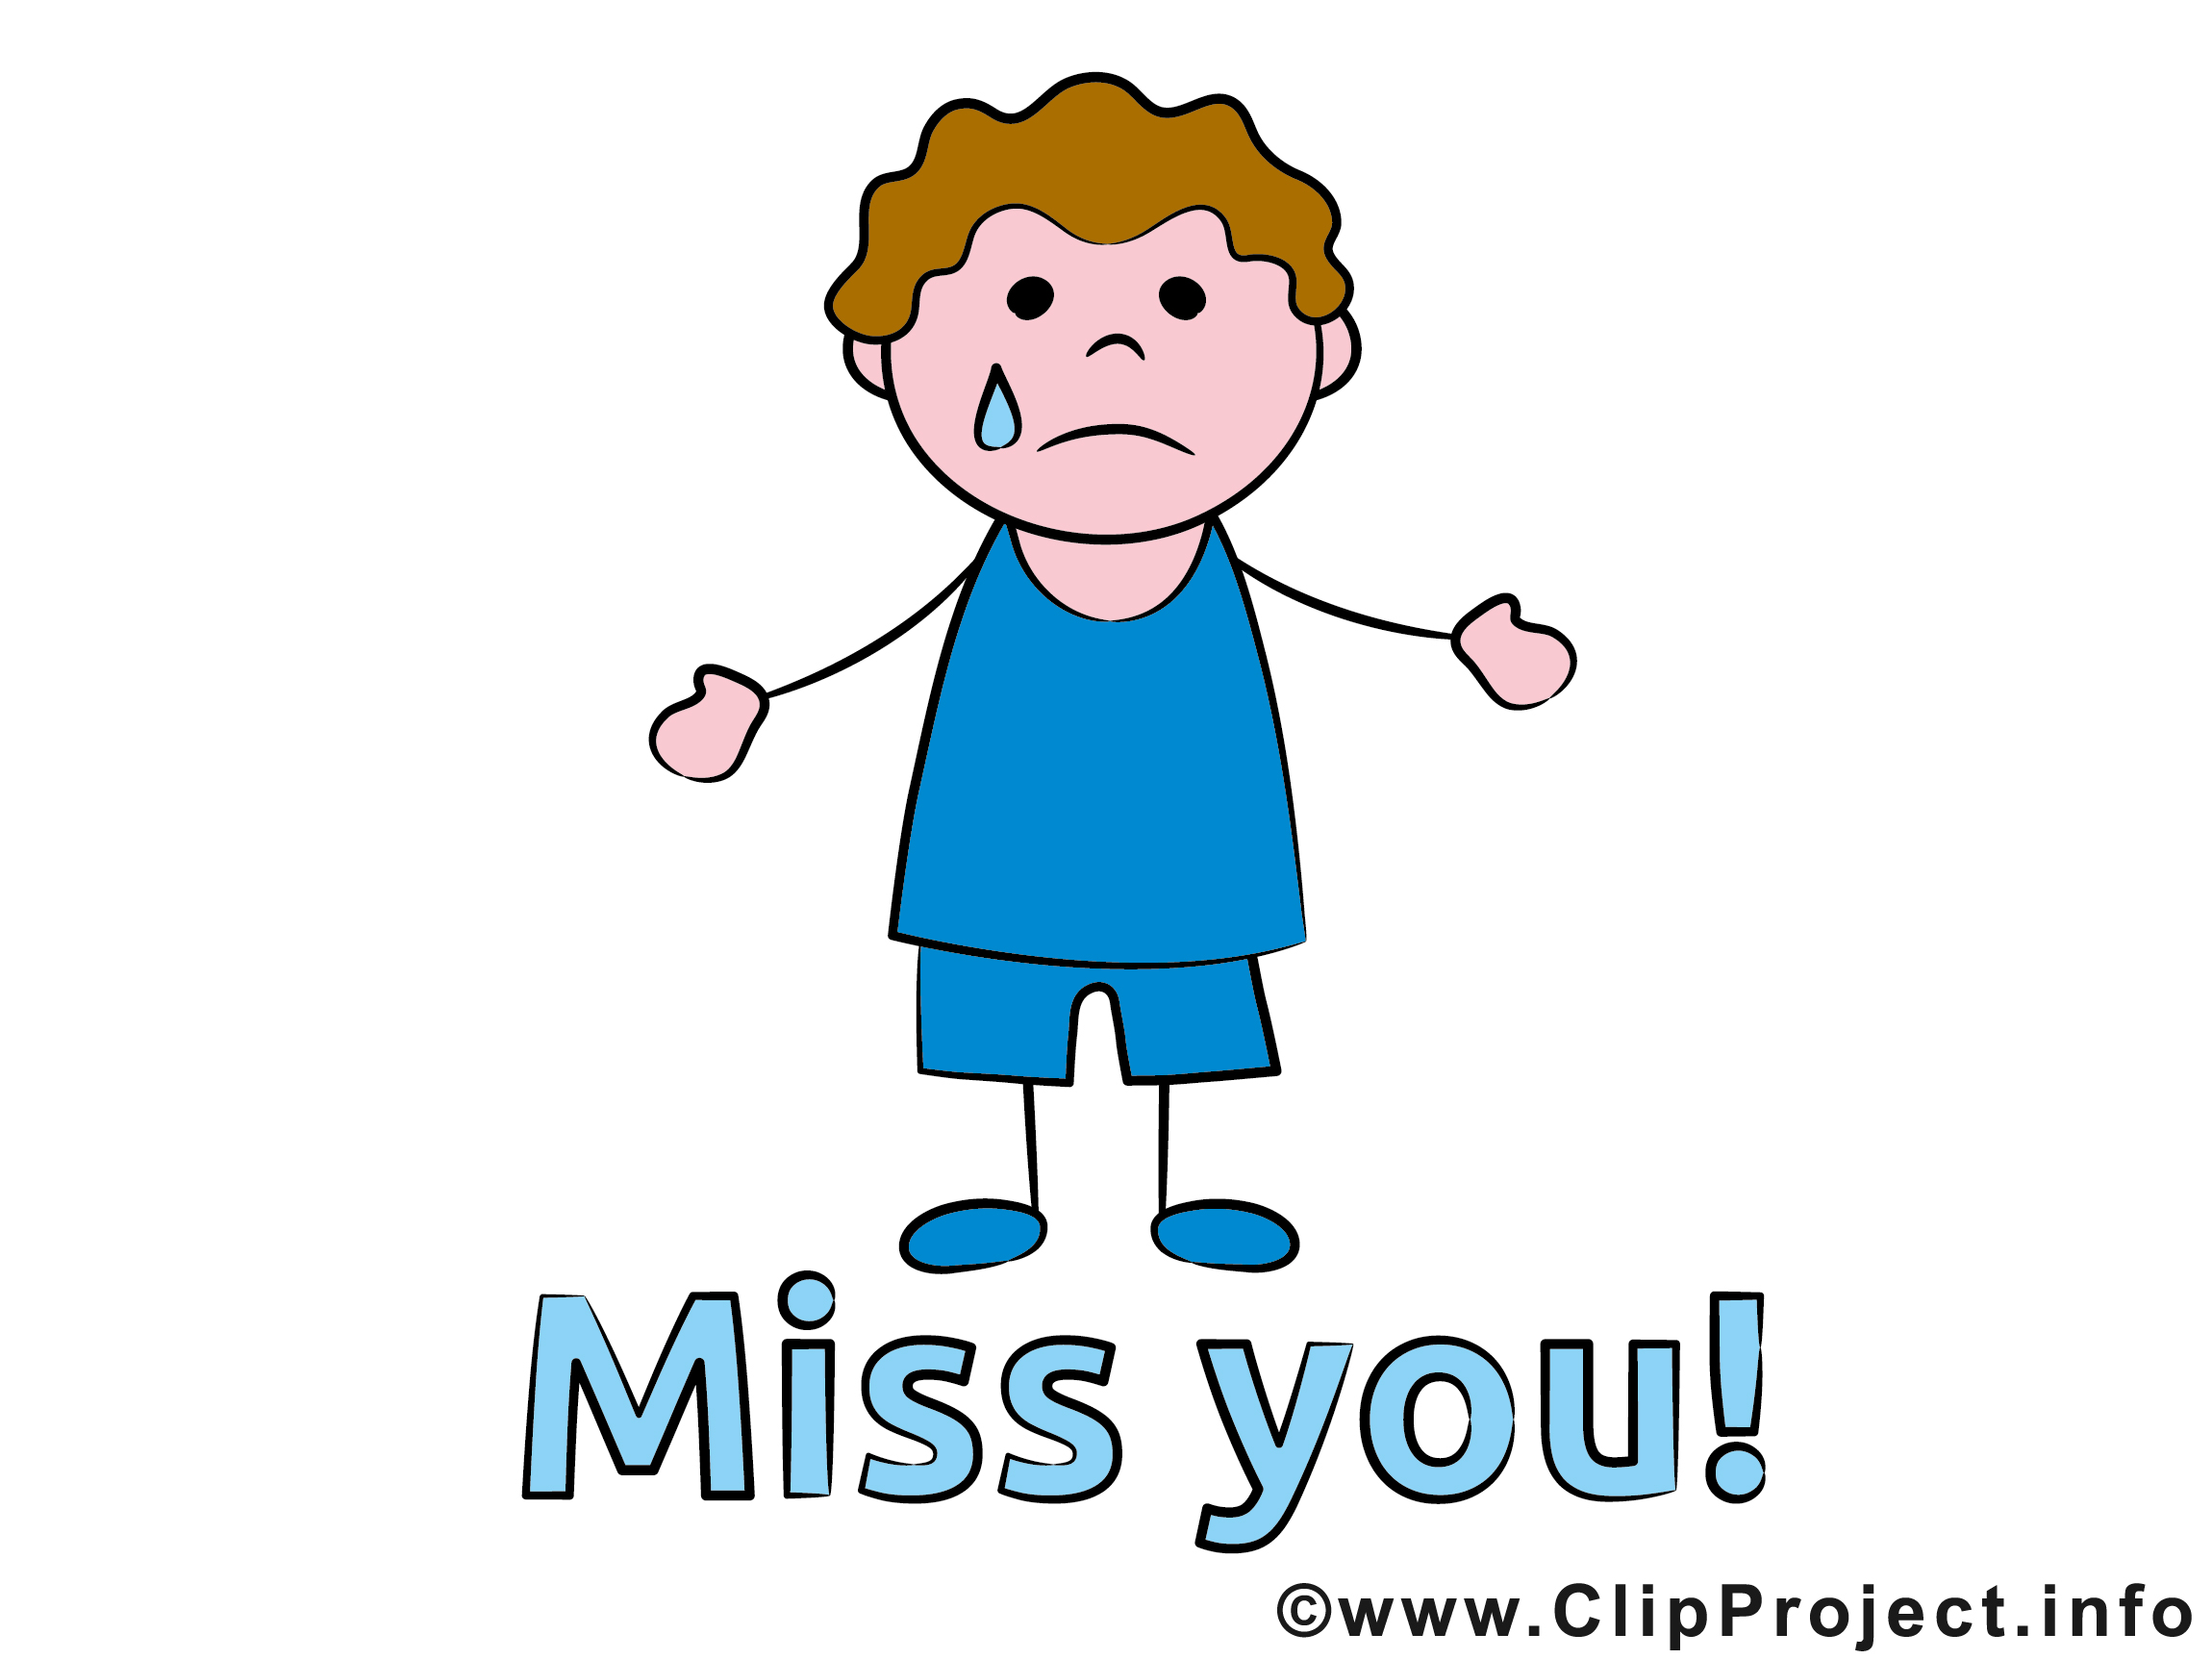 Miss You Co-worker Clipart #1 .